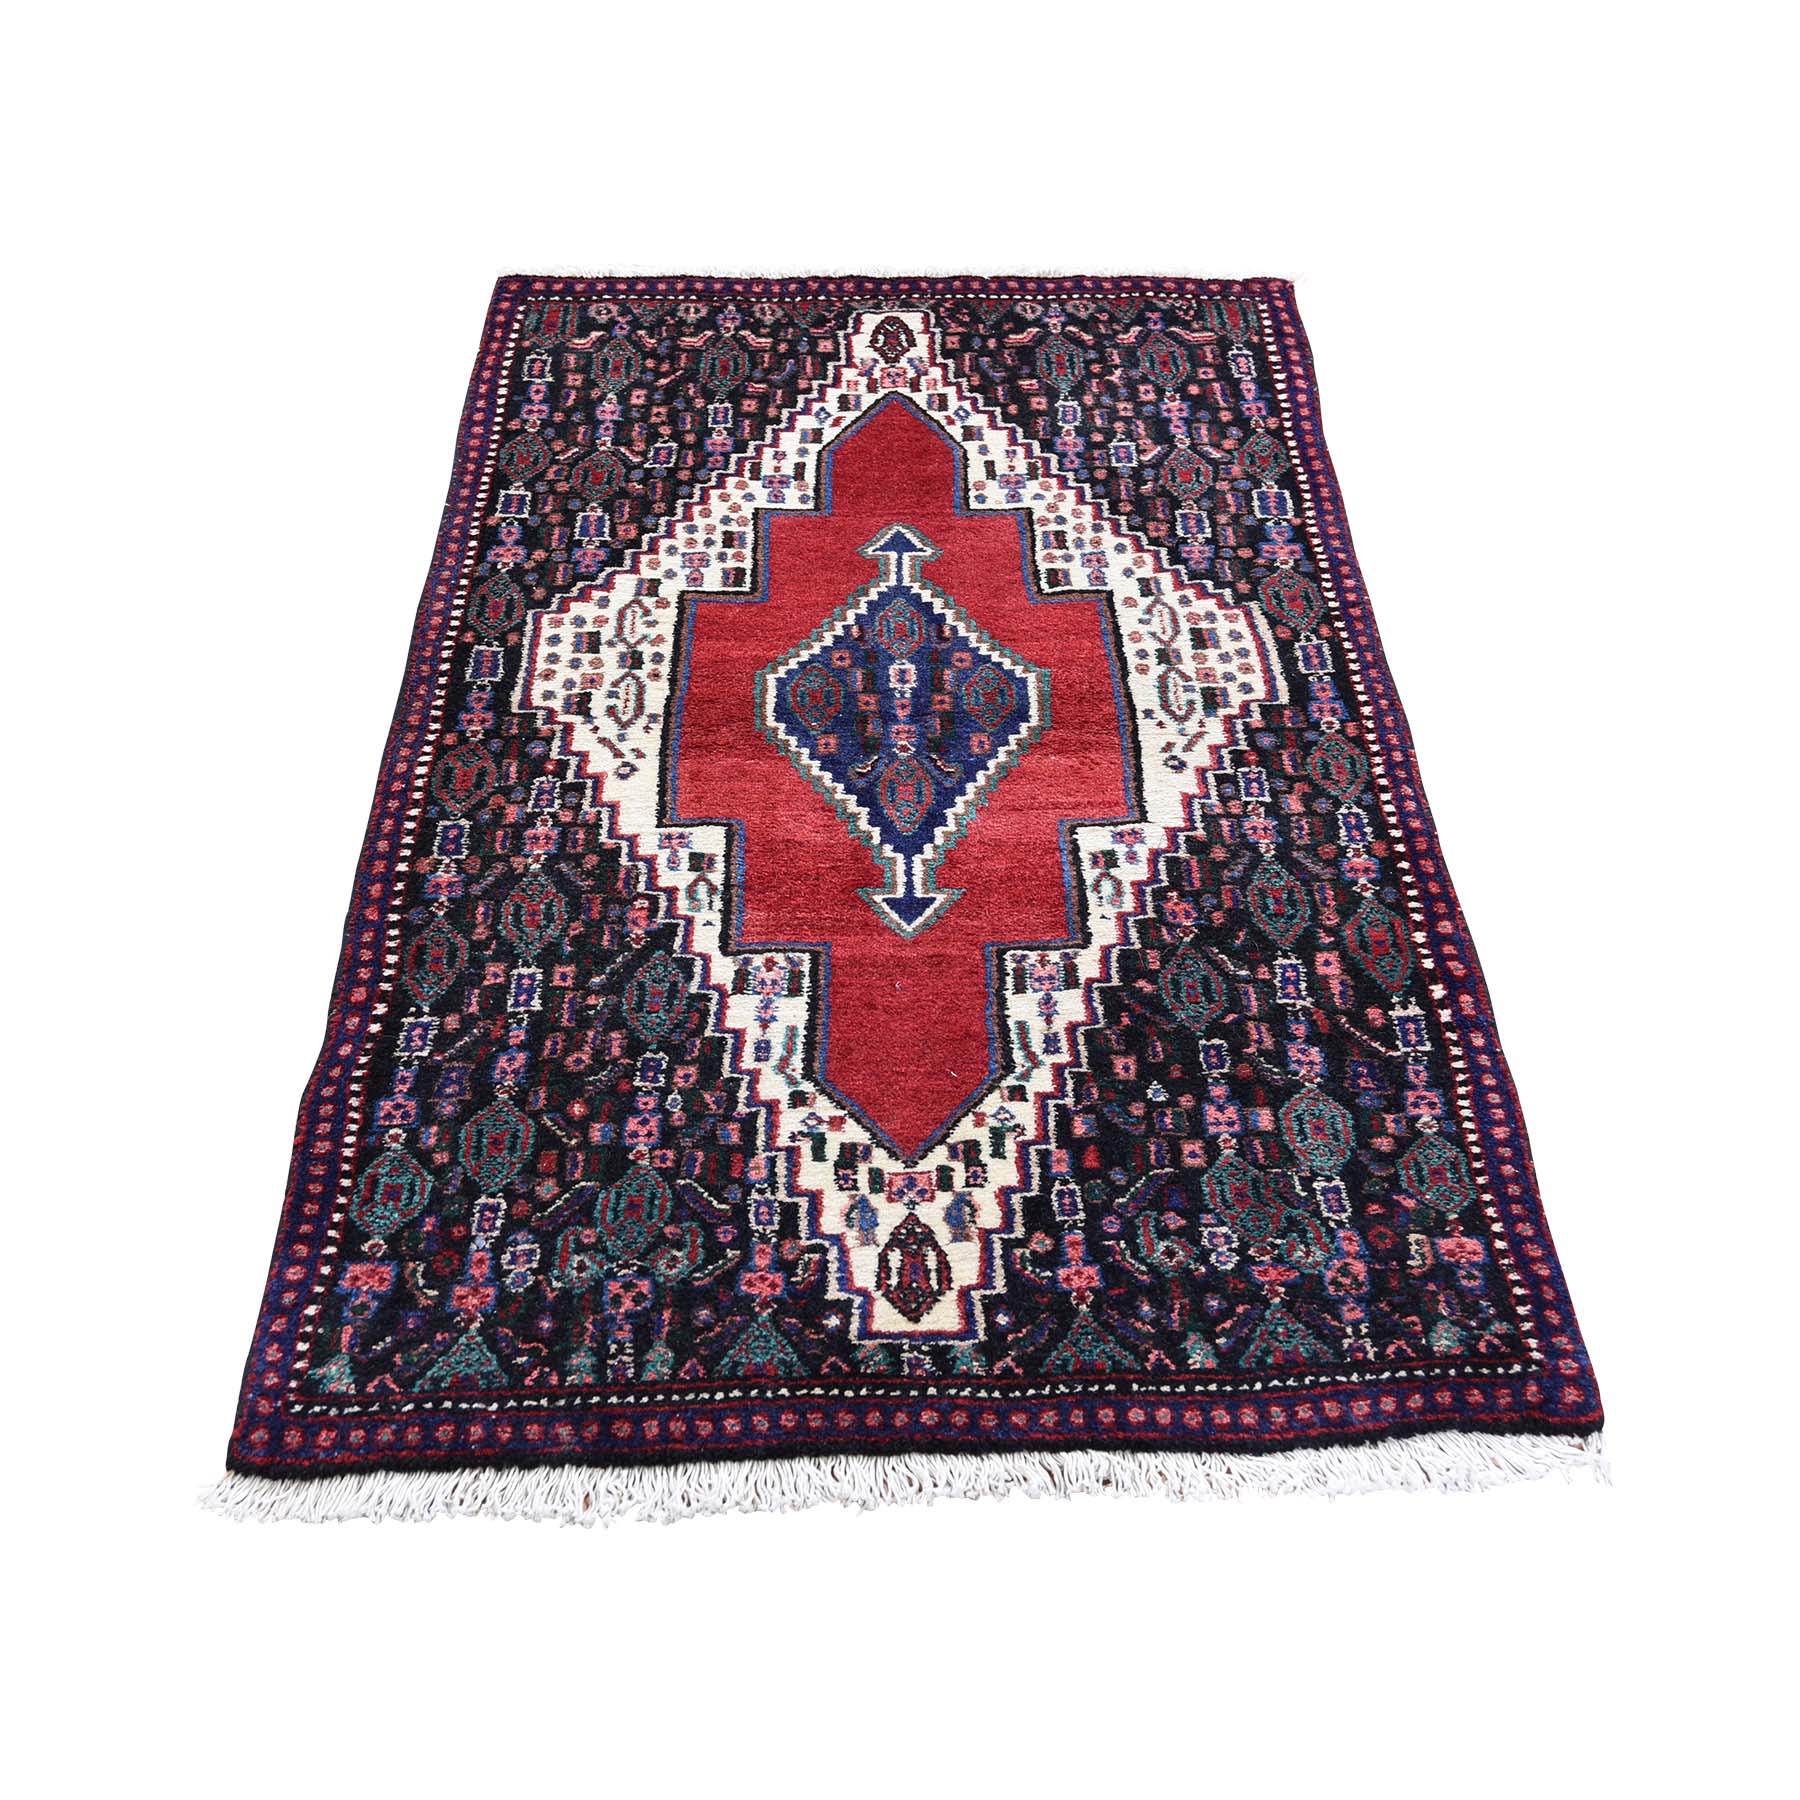 2'6"x4'5" New Persian Senneh Pure Wool Hand Woven Oriental Rug 